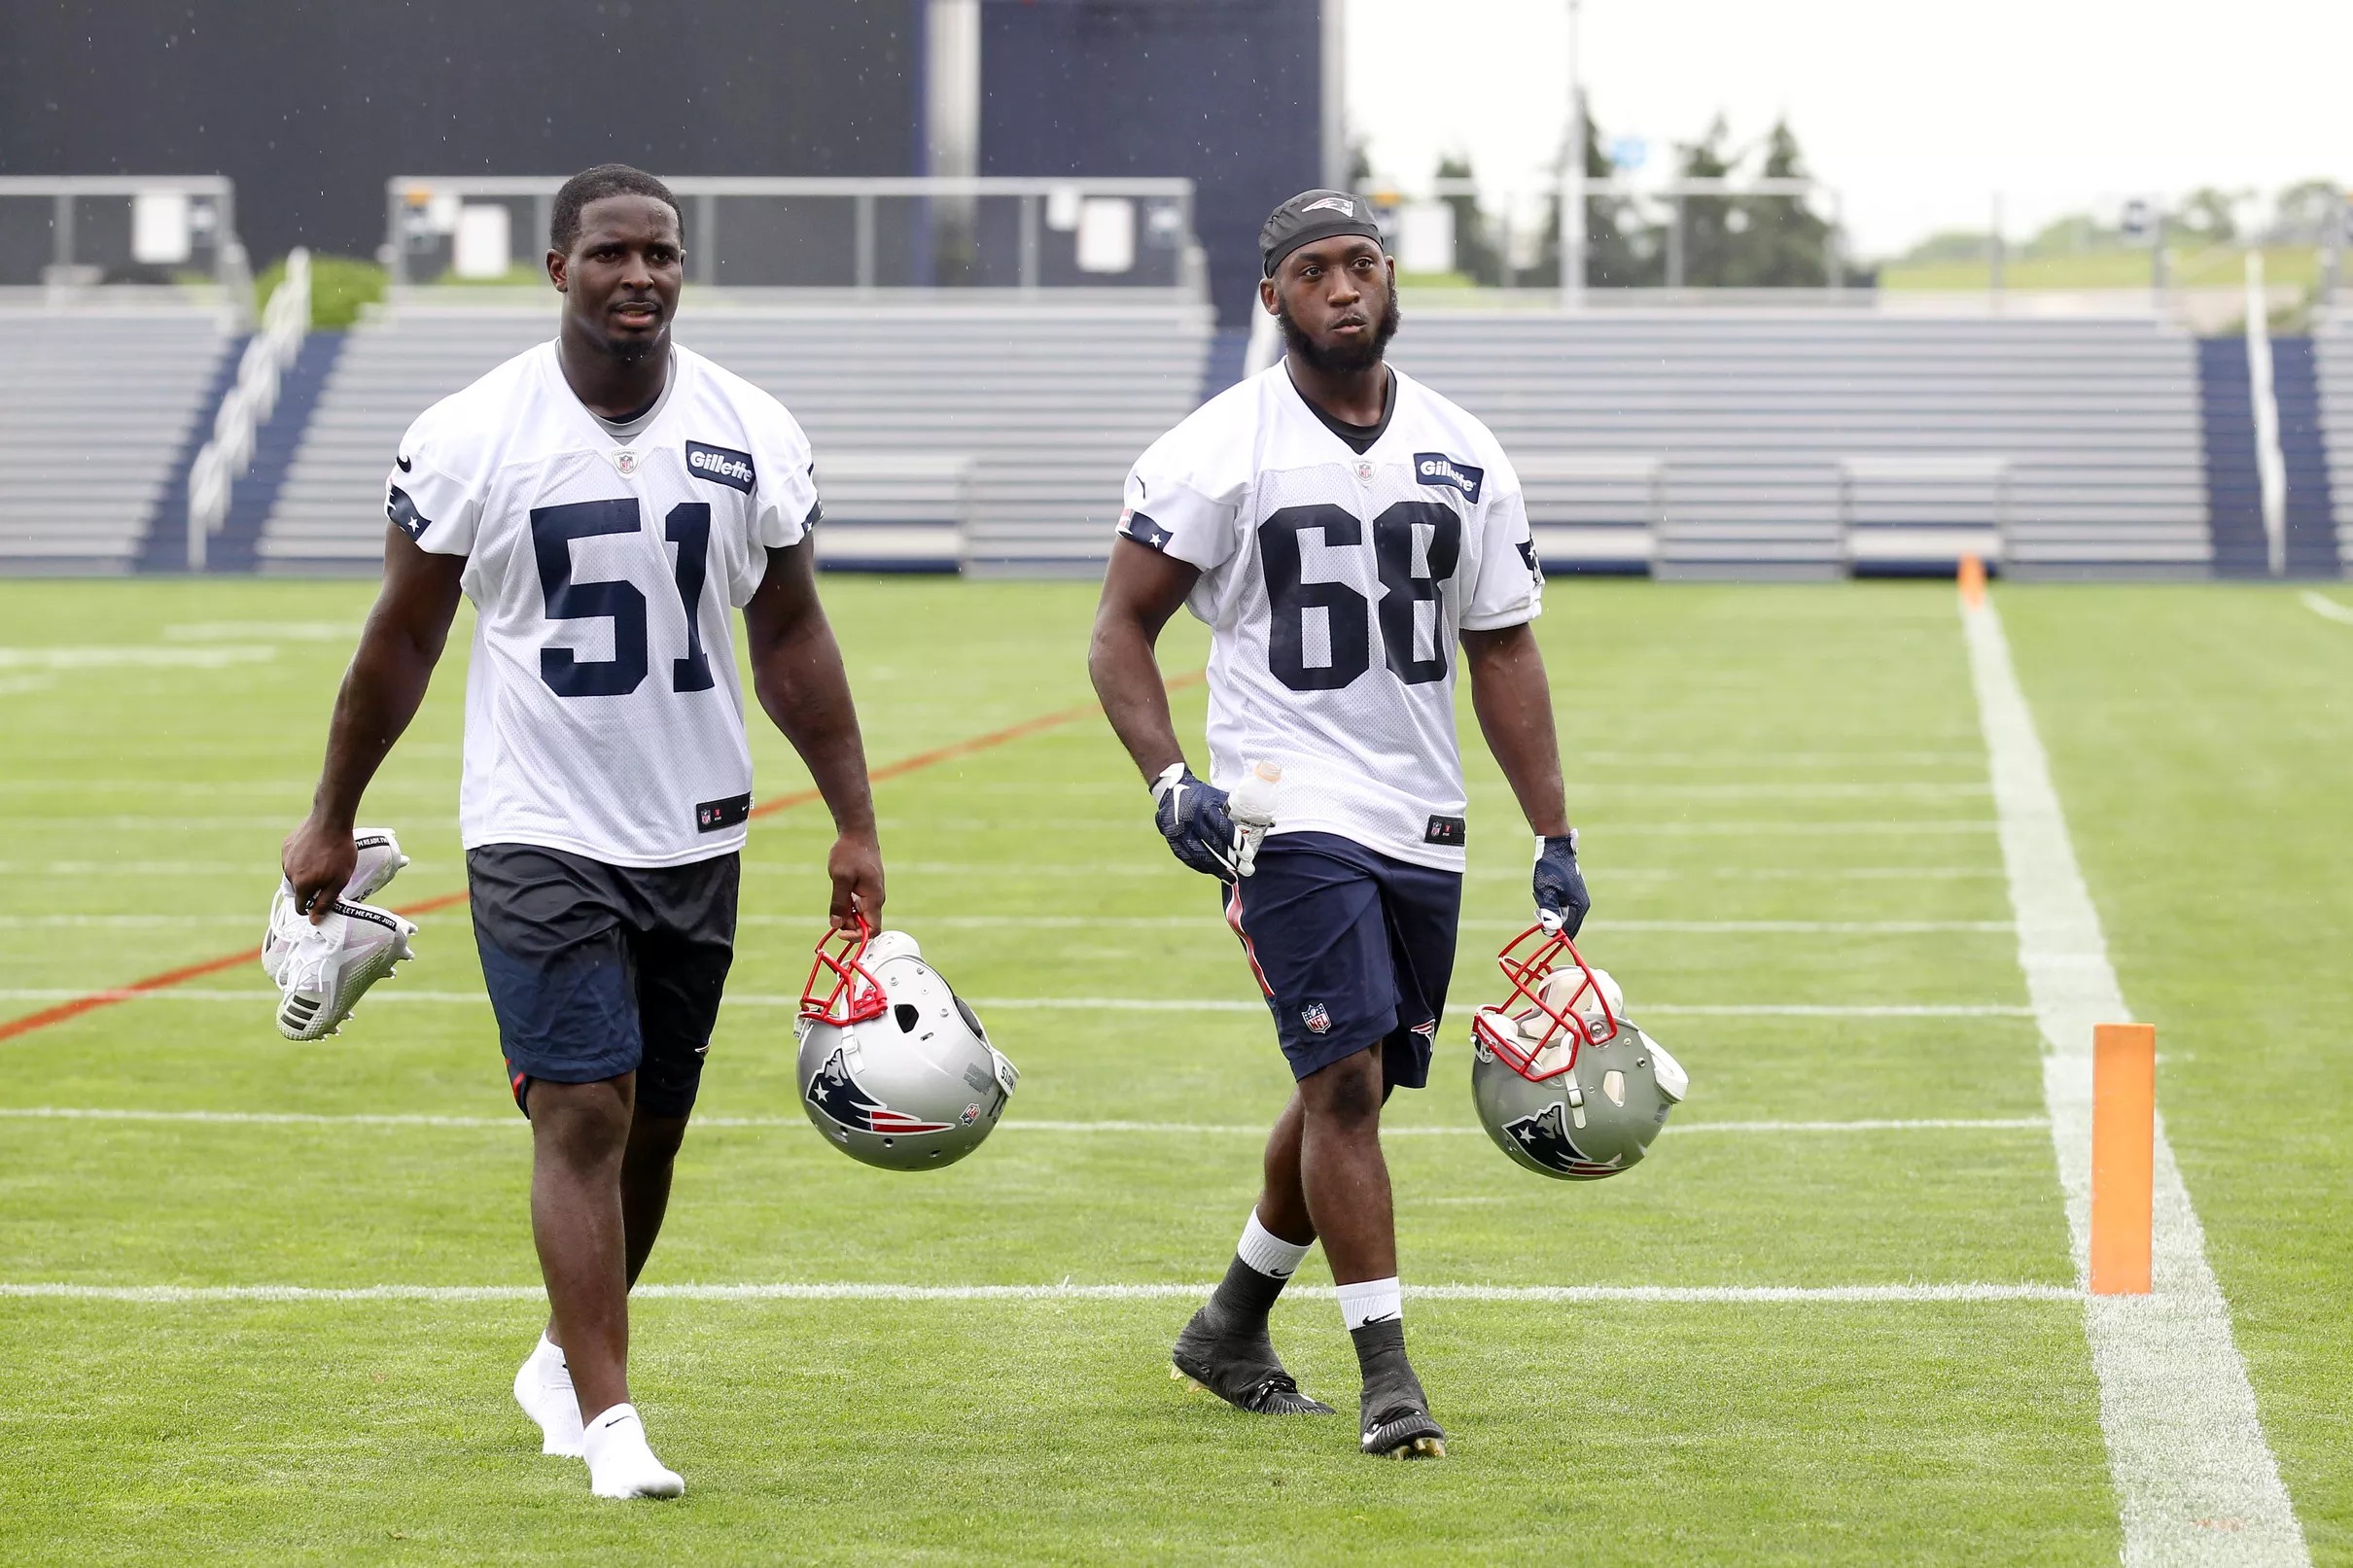 No joint practices for the Patriots this year means a different approach